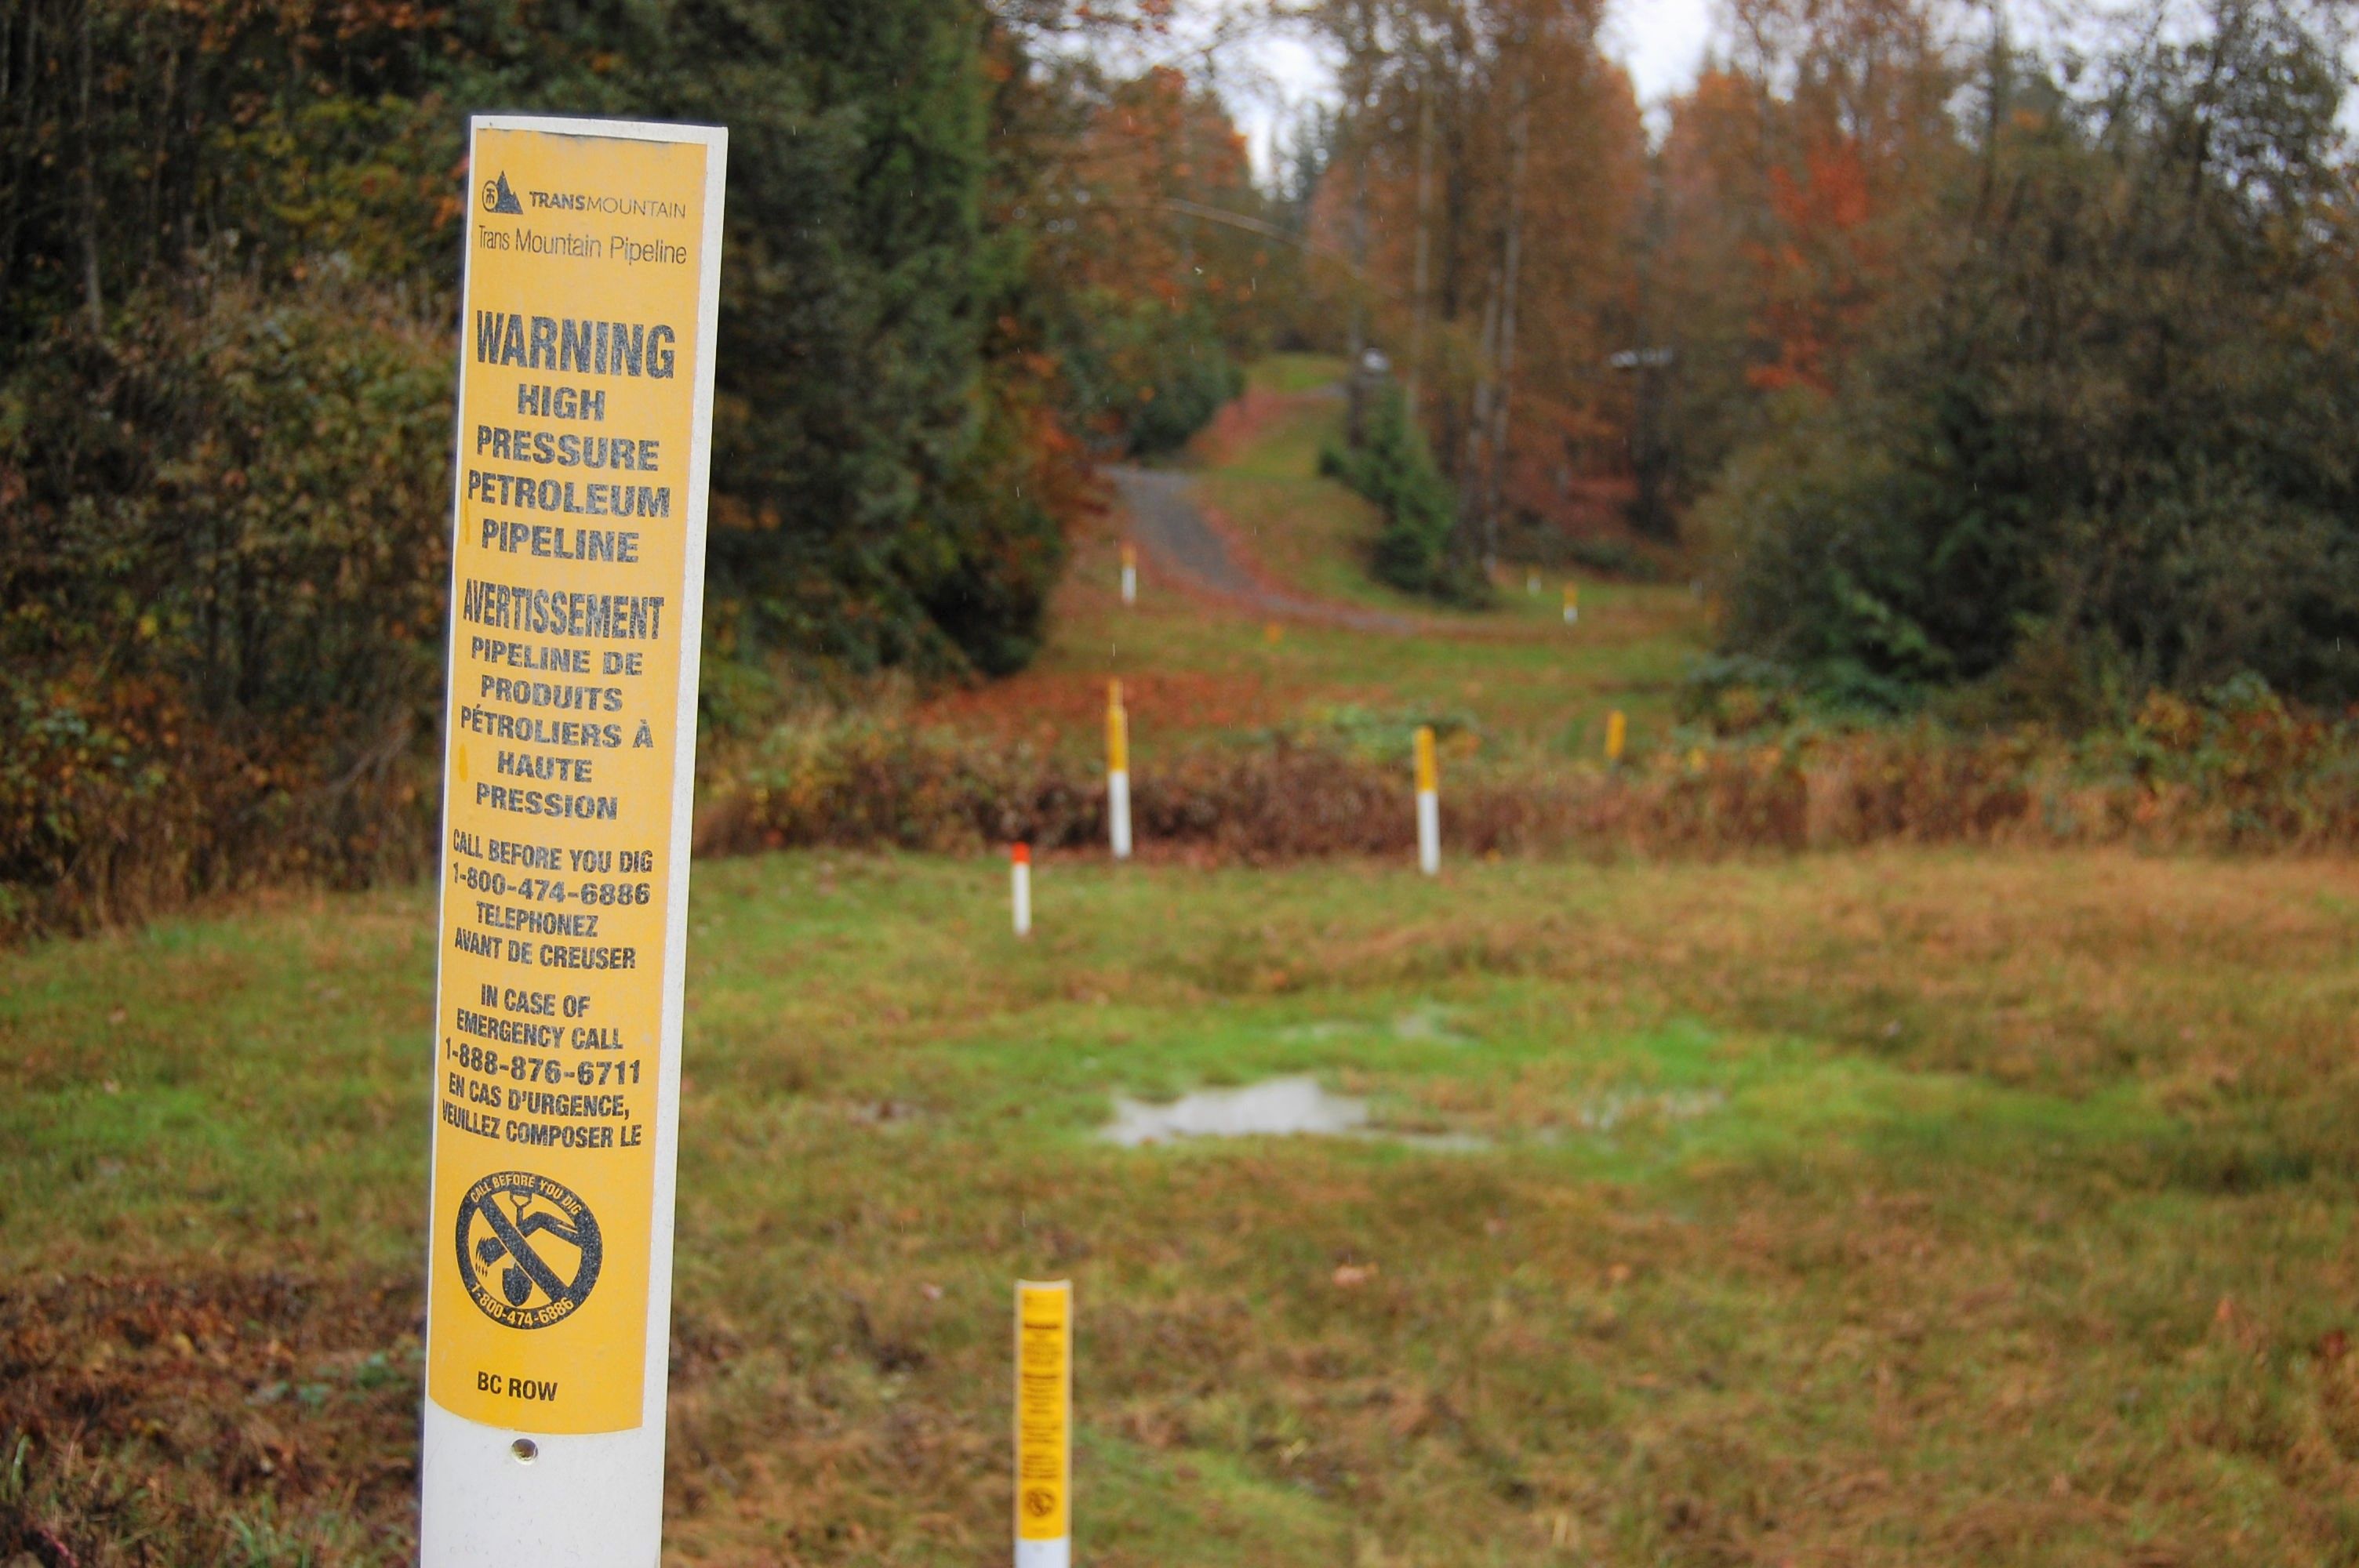 Yellow signs mark the path of the Trans Mountain pipeline. Image by Megan O'Toole. Canada, 2019.